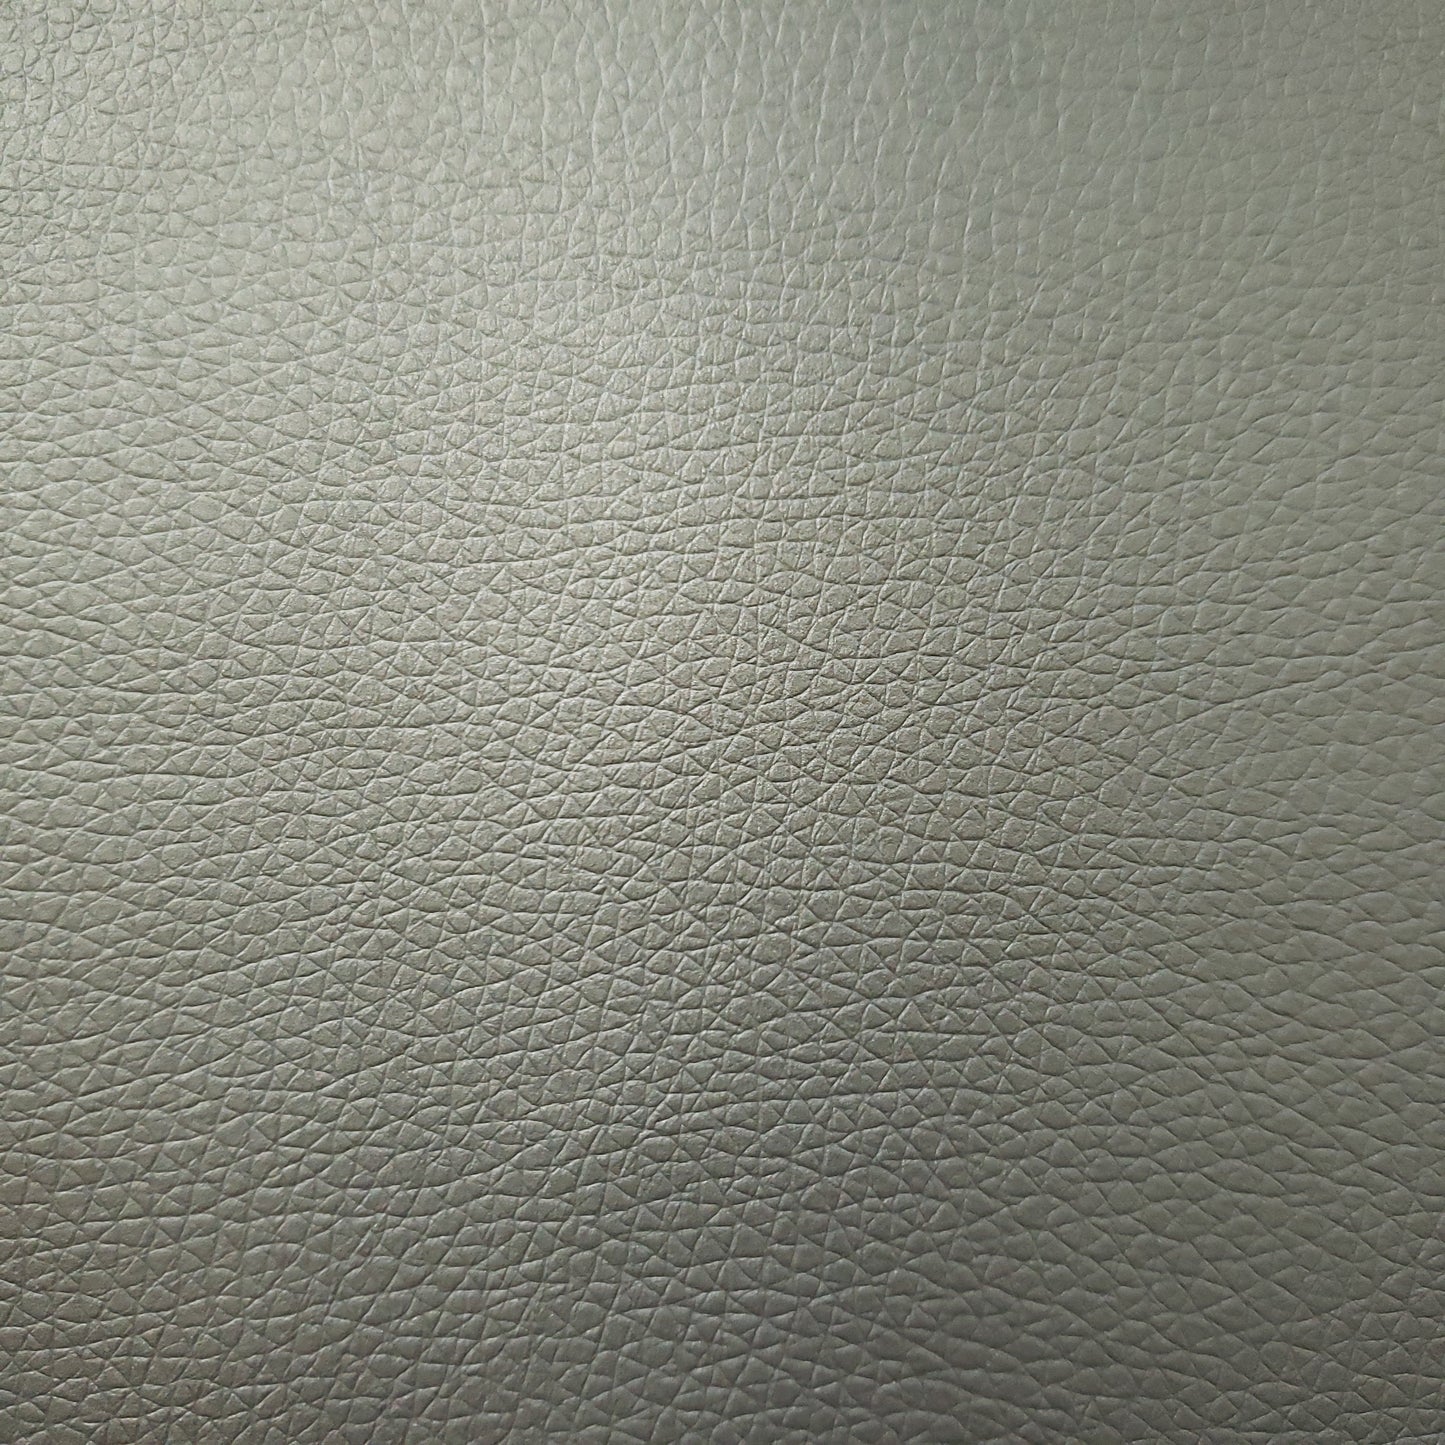 Frosted Platinum Faux Leather